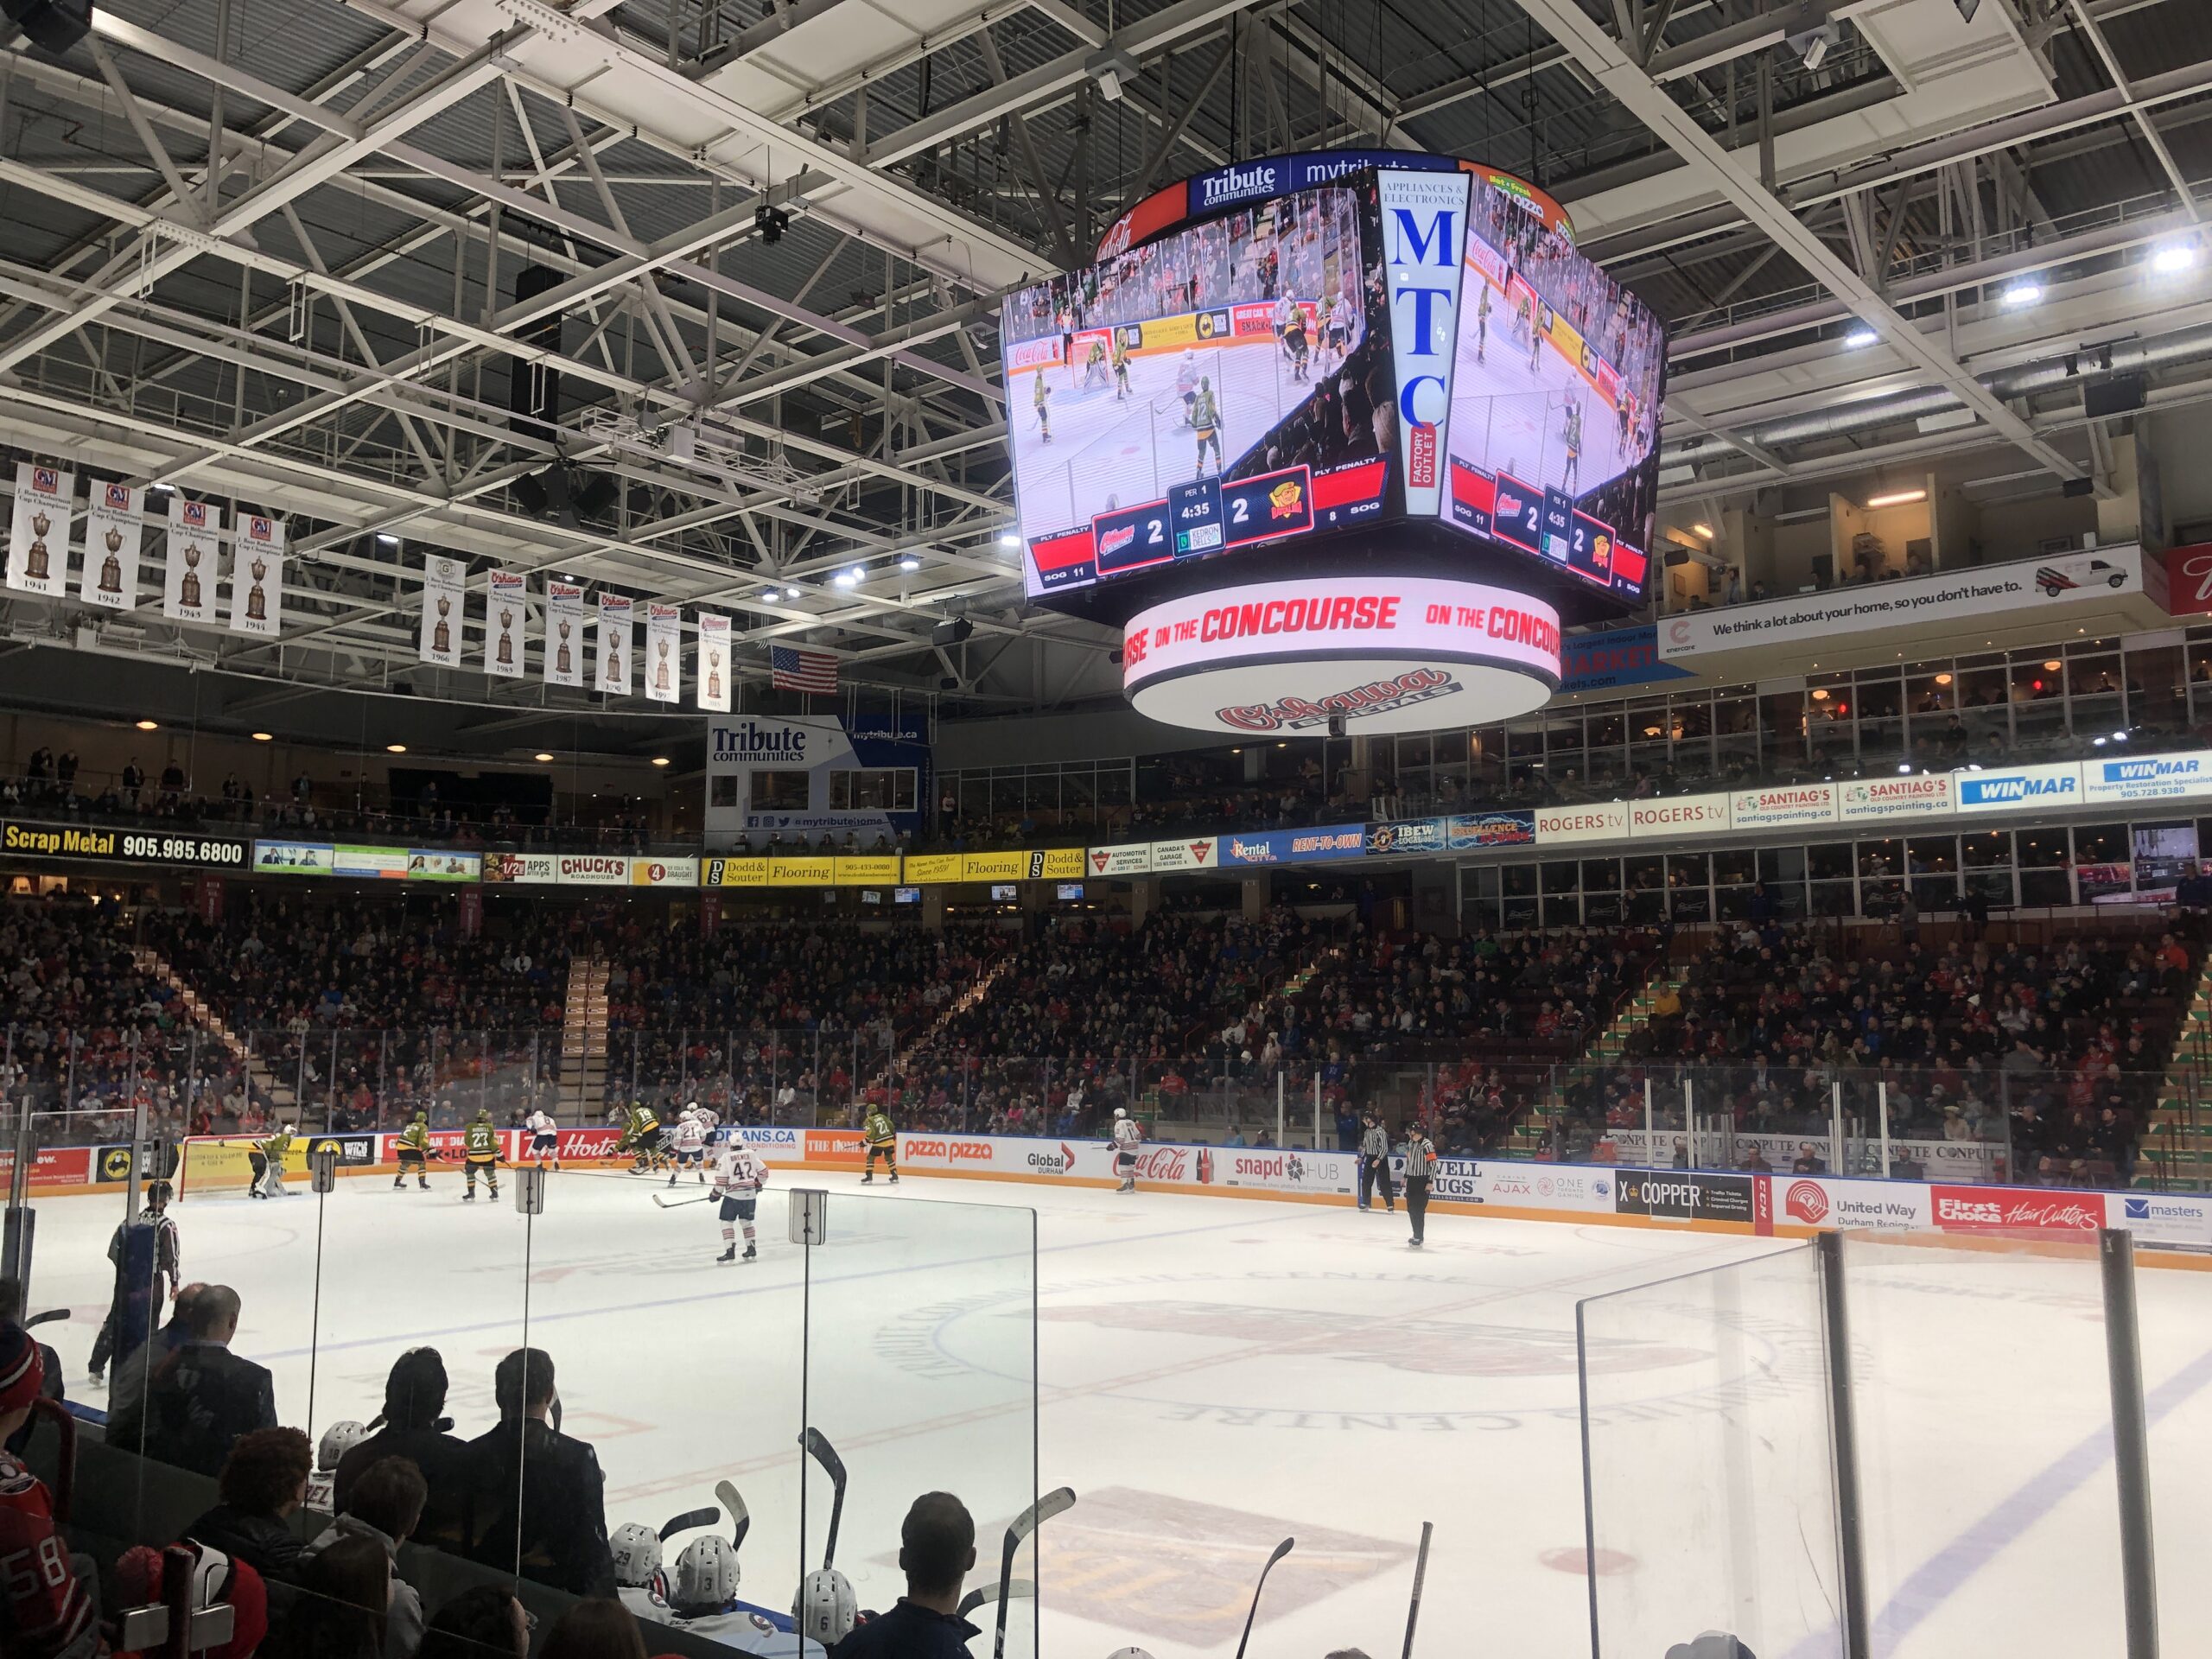 The Oshawa Generals face off against North Bay Battalion, players are fighting for the puck on the opposite end of the rink to where the photo was taken. The score is 2-2.